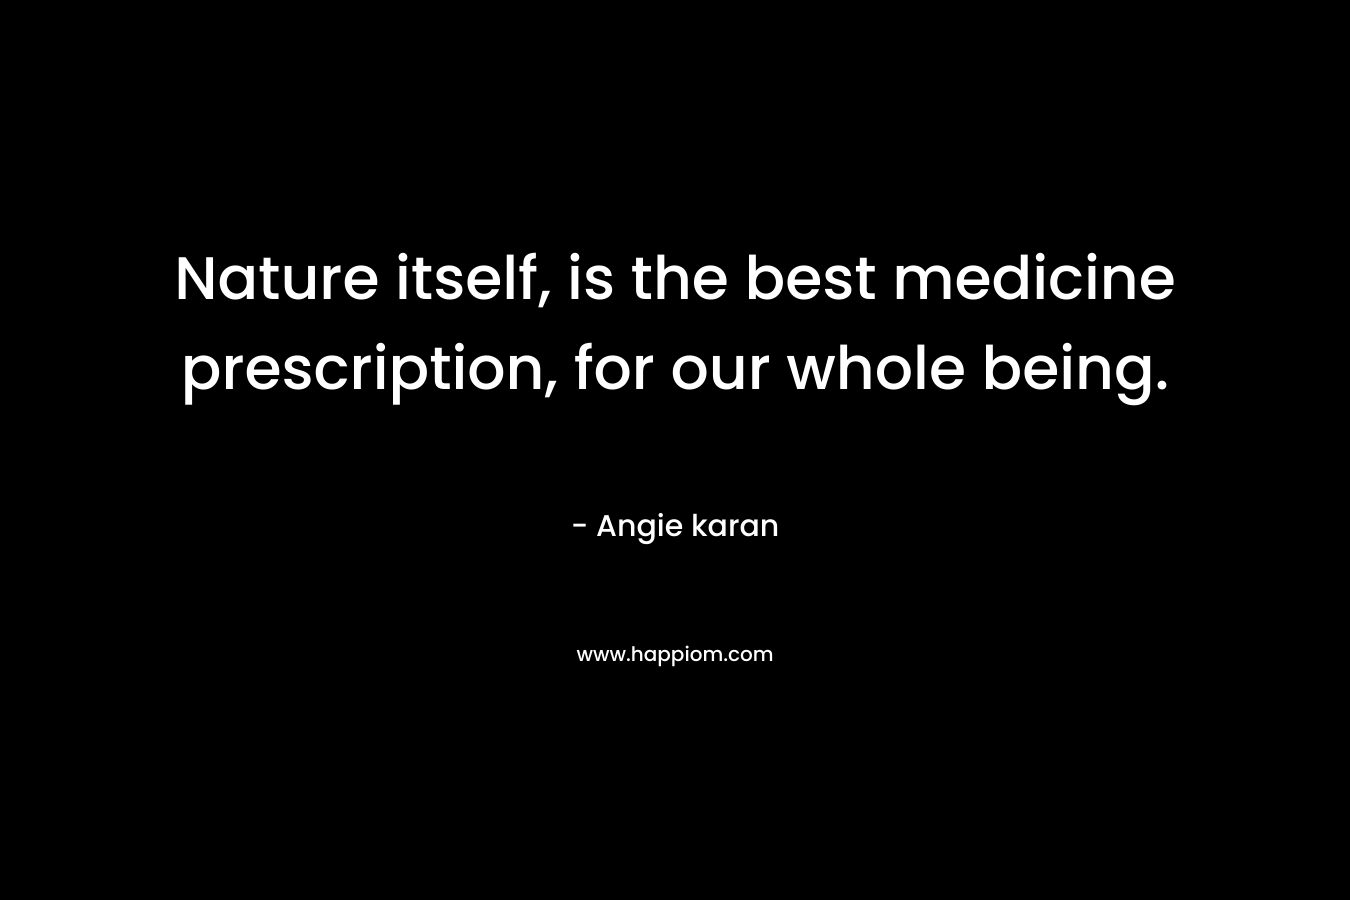 Nature itself, is the best medicine prescription, for our whole being.